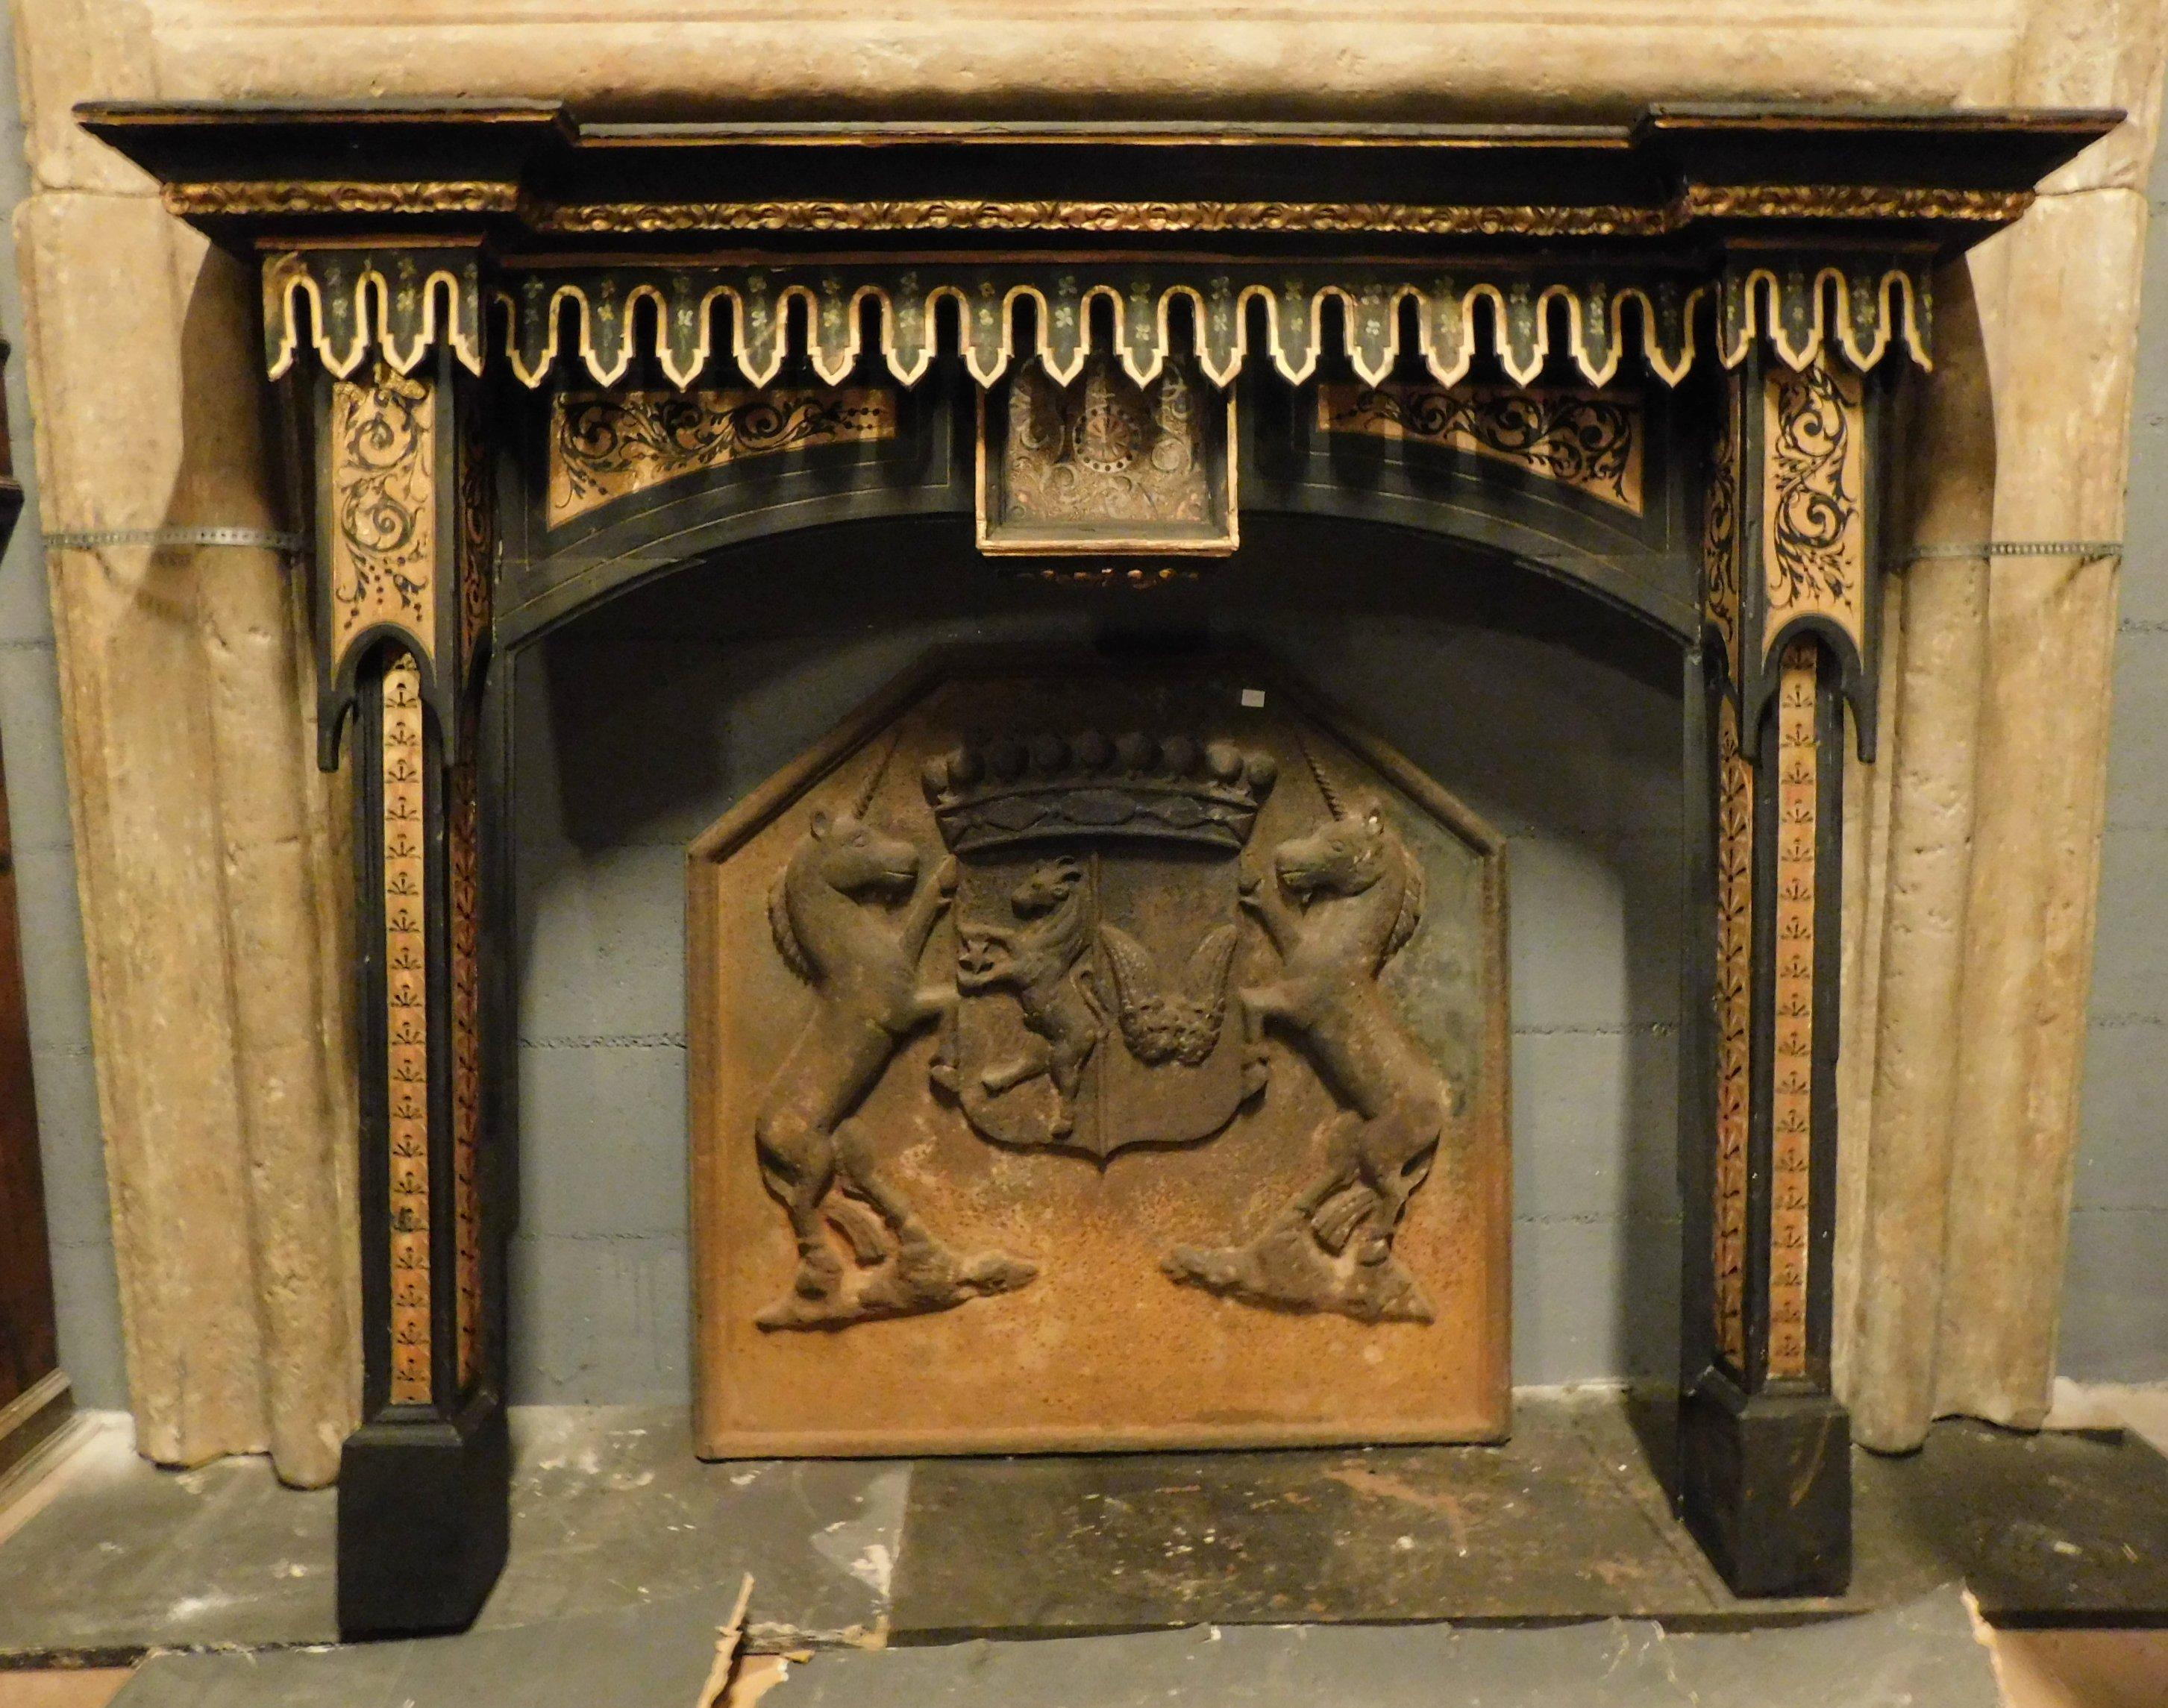 Antique fireplace mantle in black and gold lacquered wood, with spiers and sculptures in full neo-gothic style, therefore from the early mid-19th century, very articulated and of guaranteed artistic effect, very fascinating and valuable, will serve